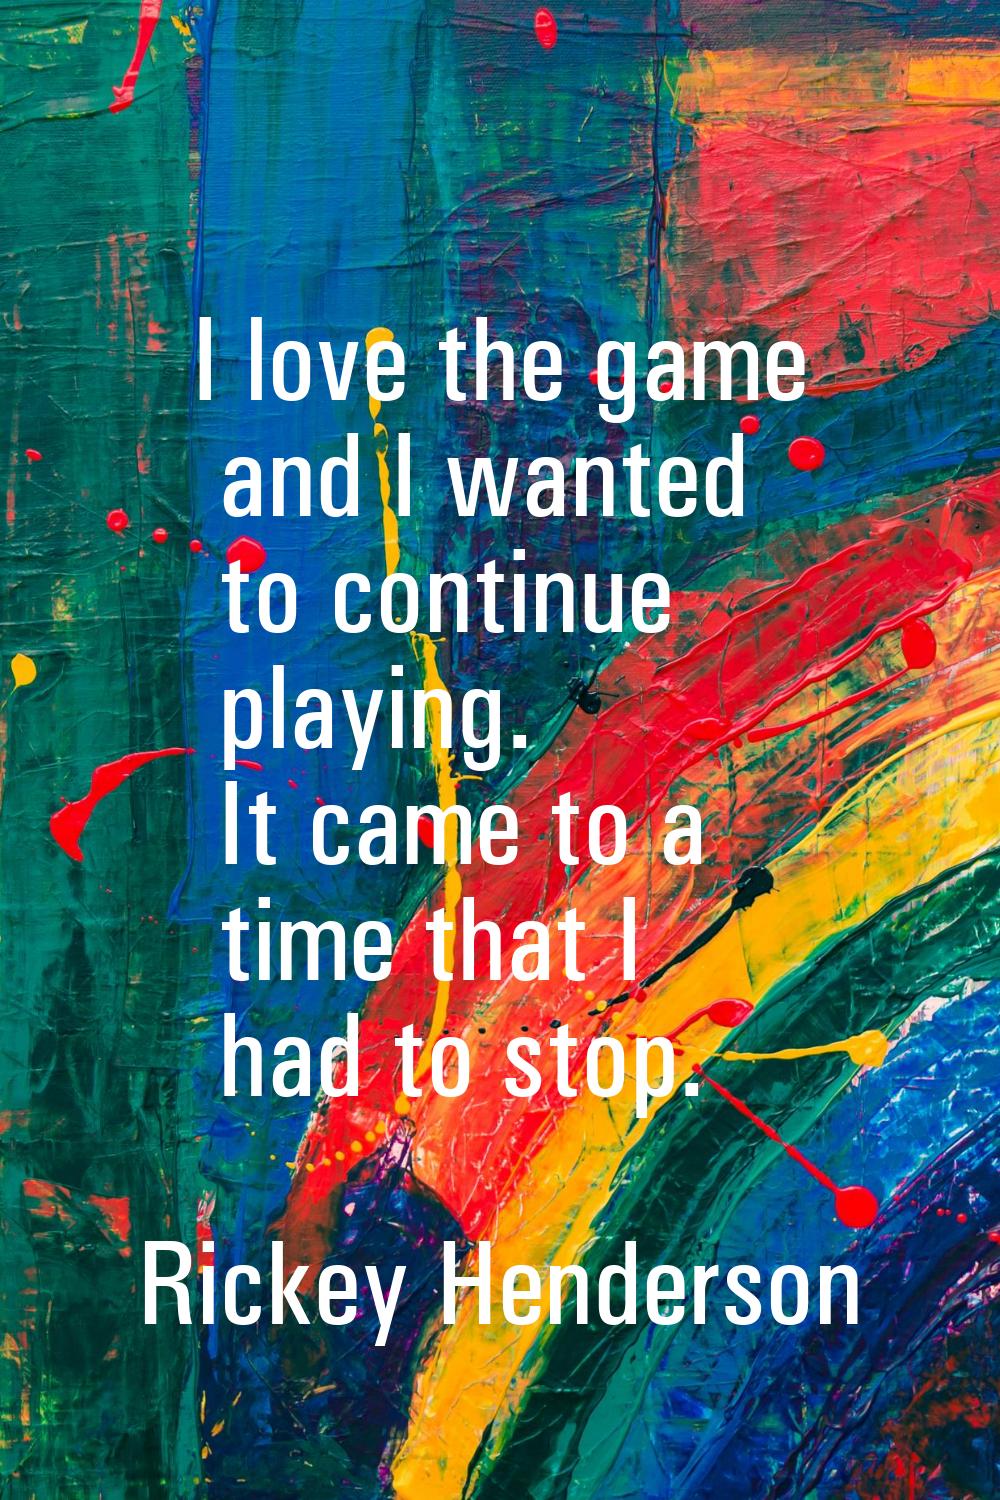 I love the game and I wanted to continue playing. It came to a time that I had to stop.